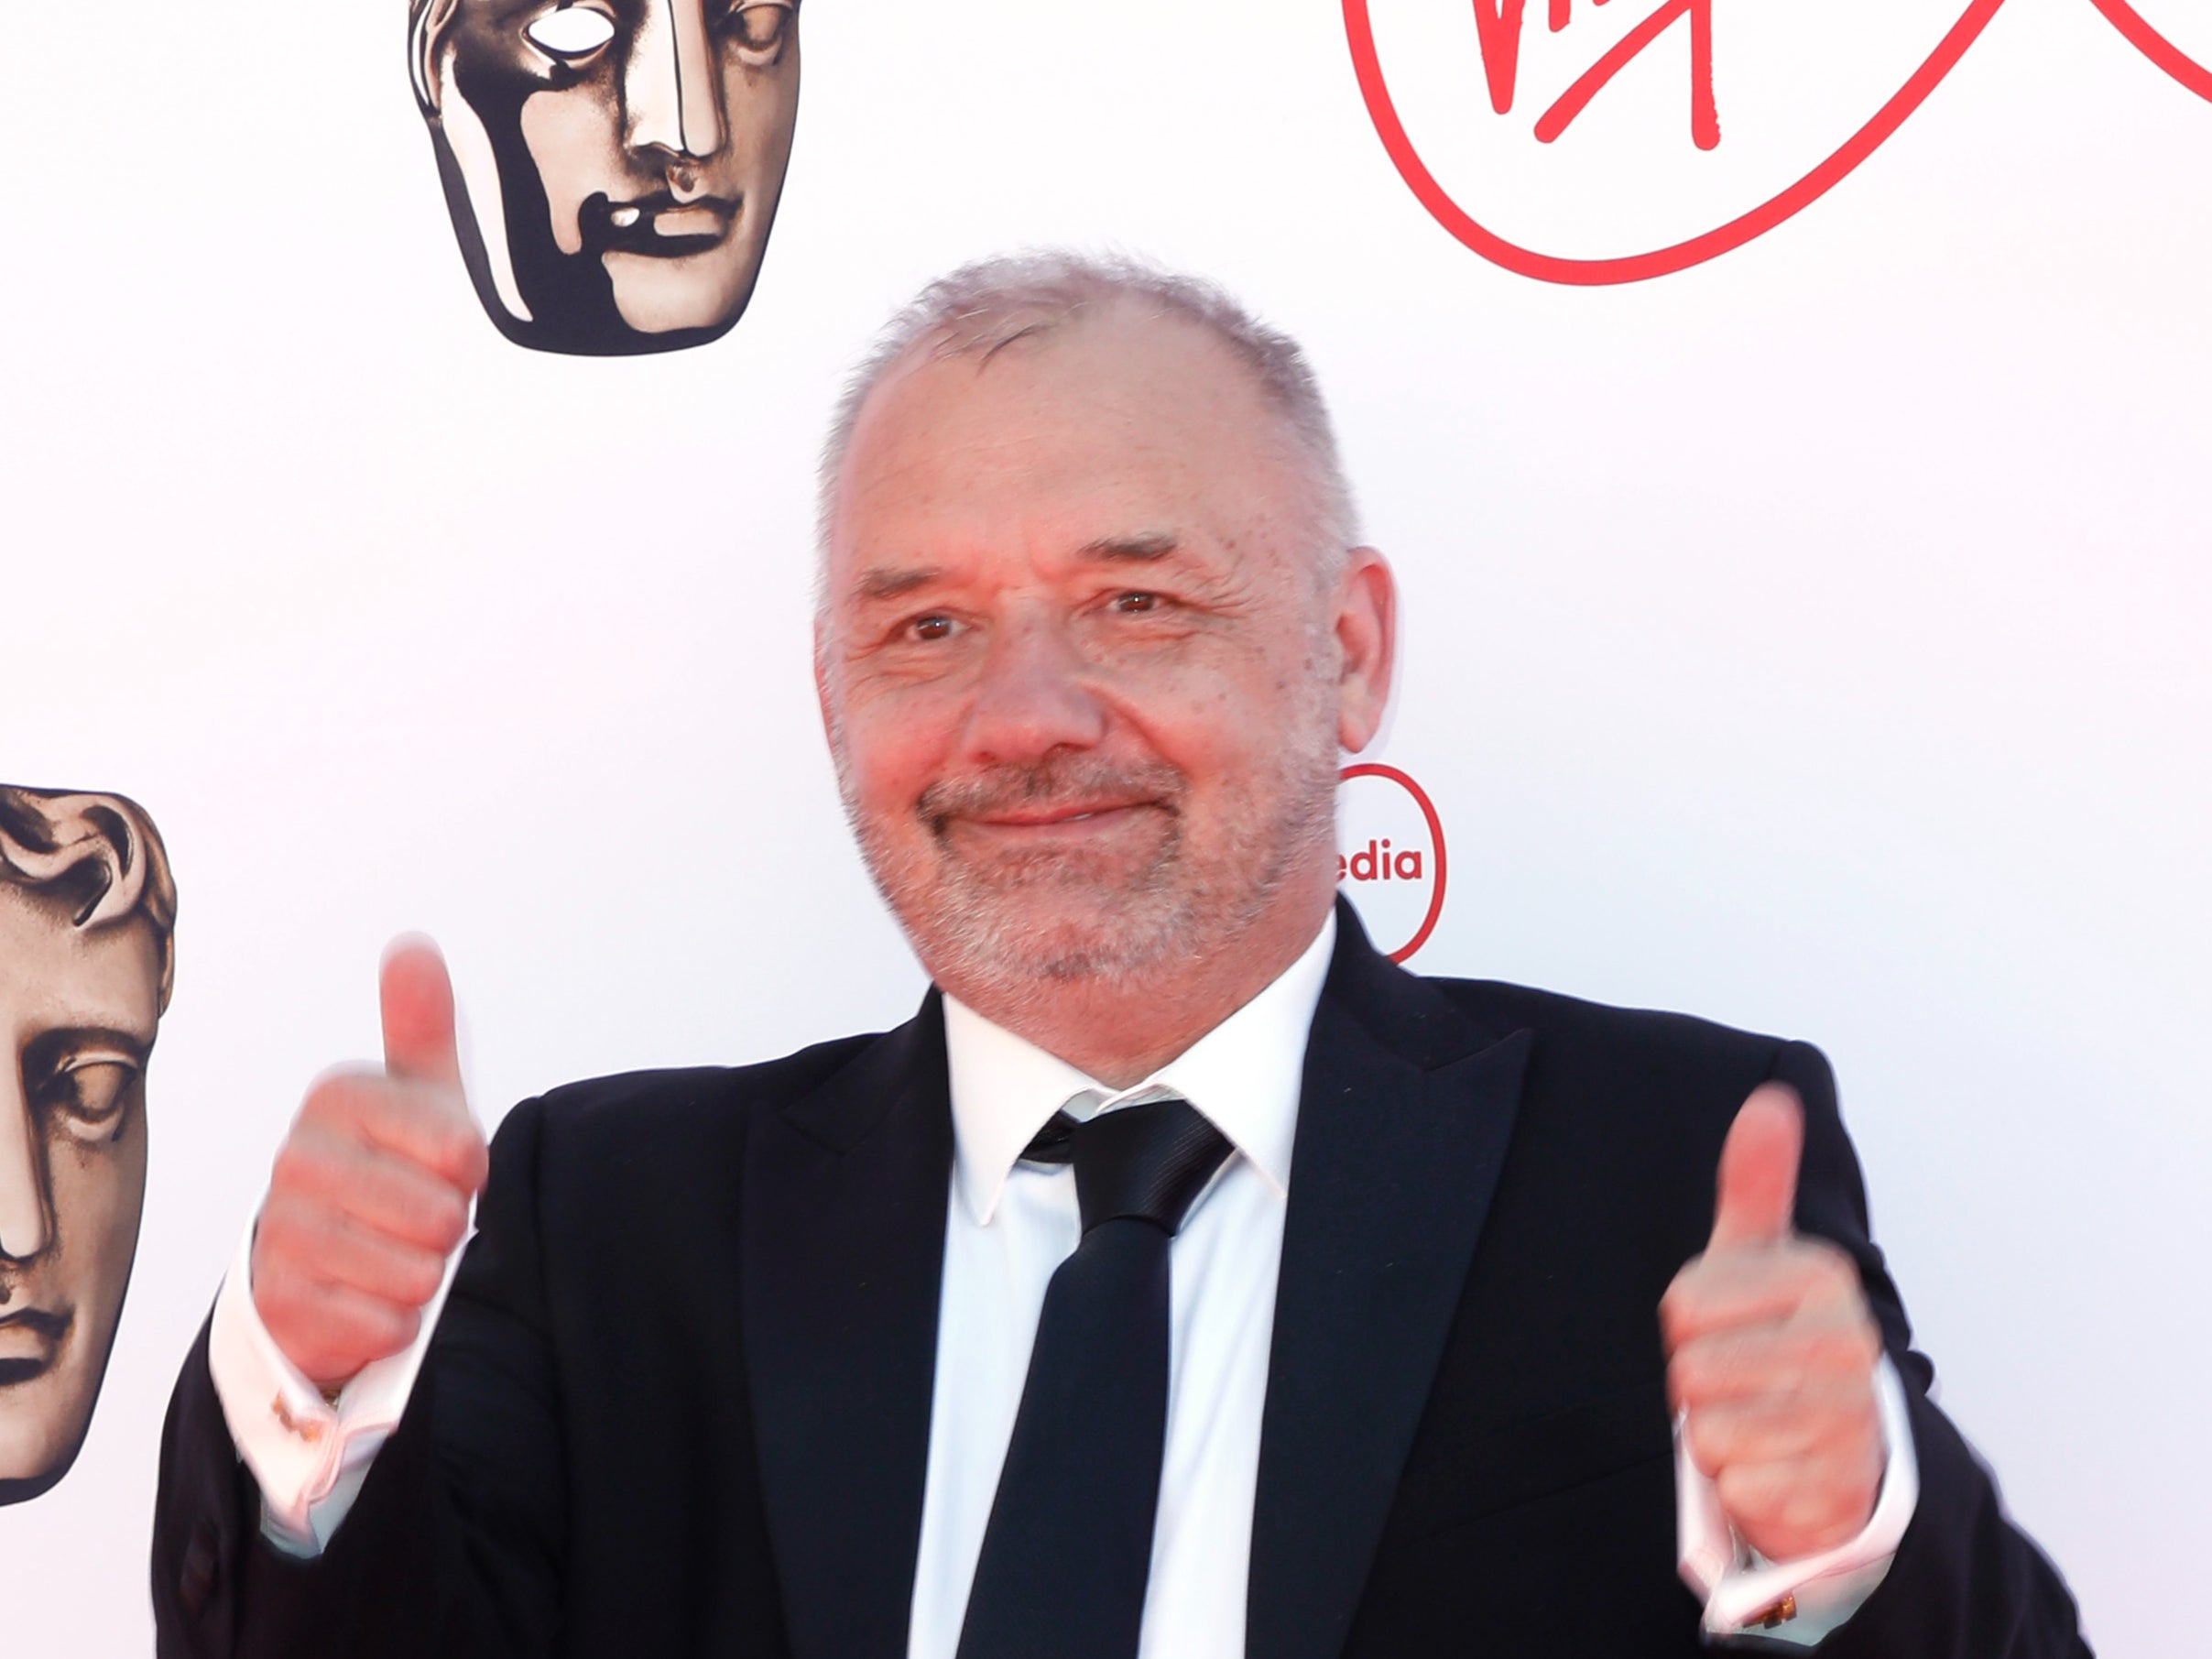 Bob Mortimer has given a health update after being hospitalised at the weekend